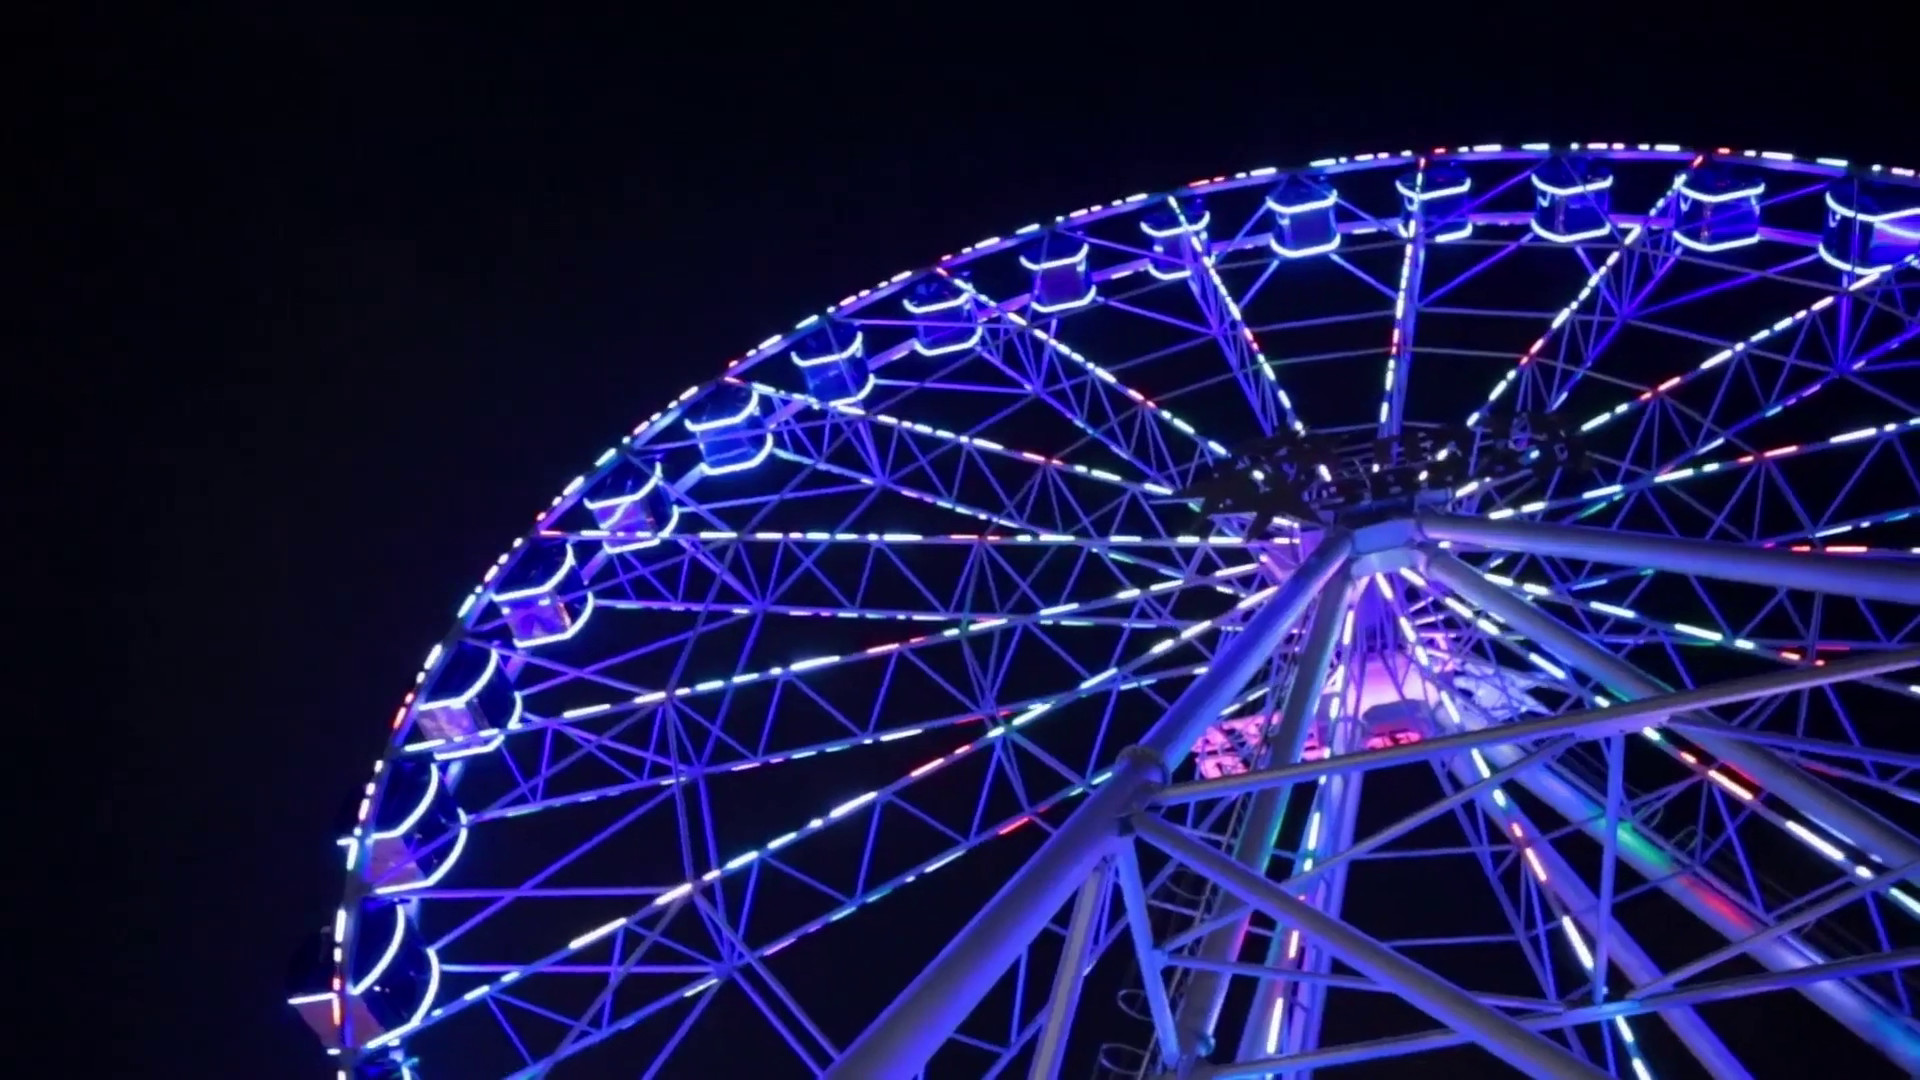 1920x1080 Ferris wheel in blue neon light on dark background, Part of Ferris wheel  with blue illumination against a black sky background at night.